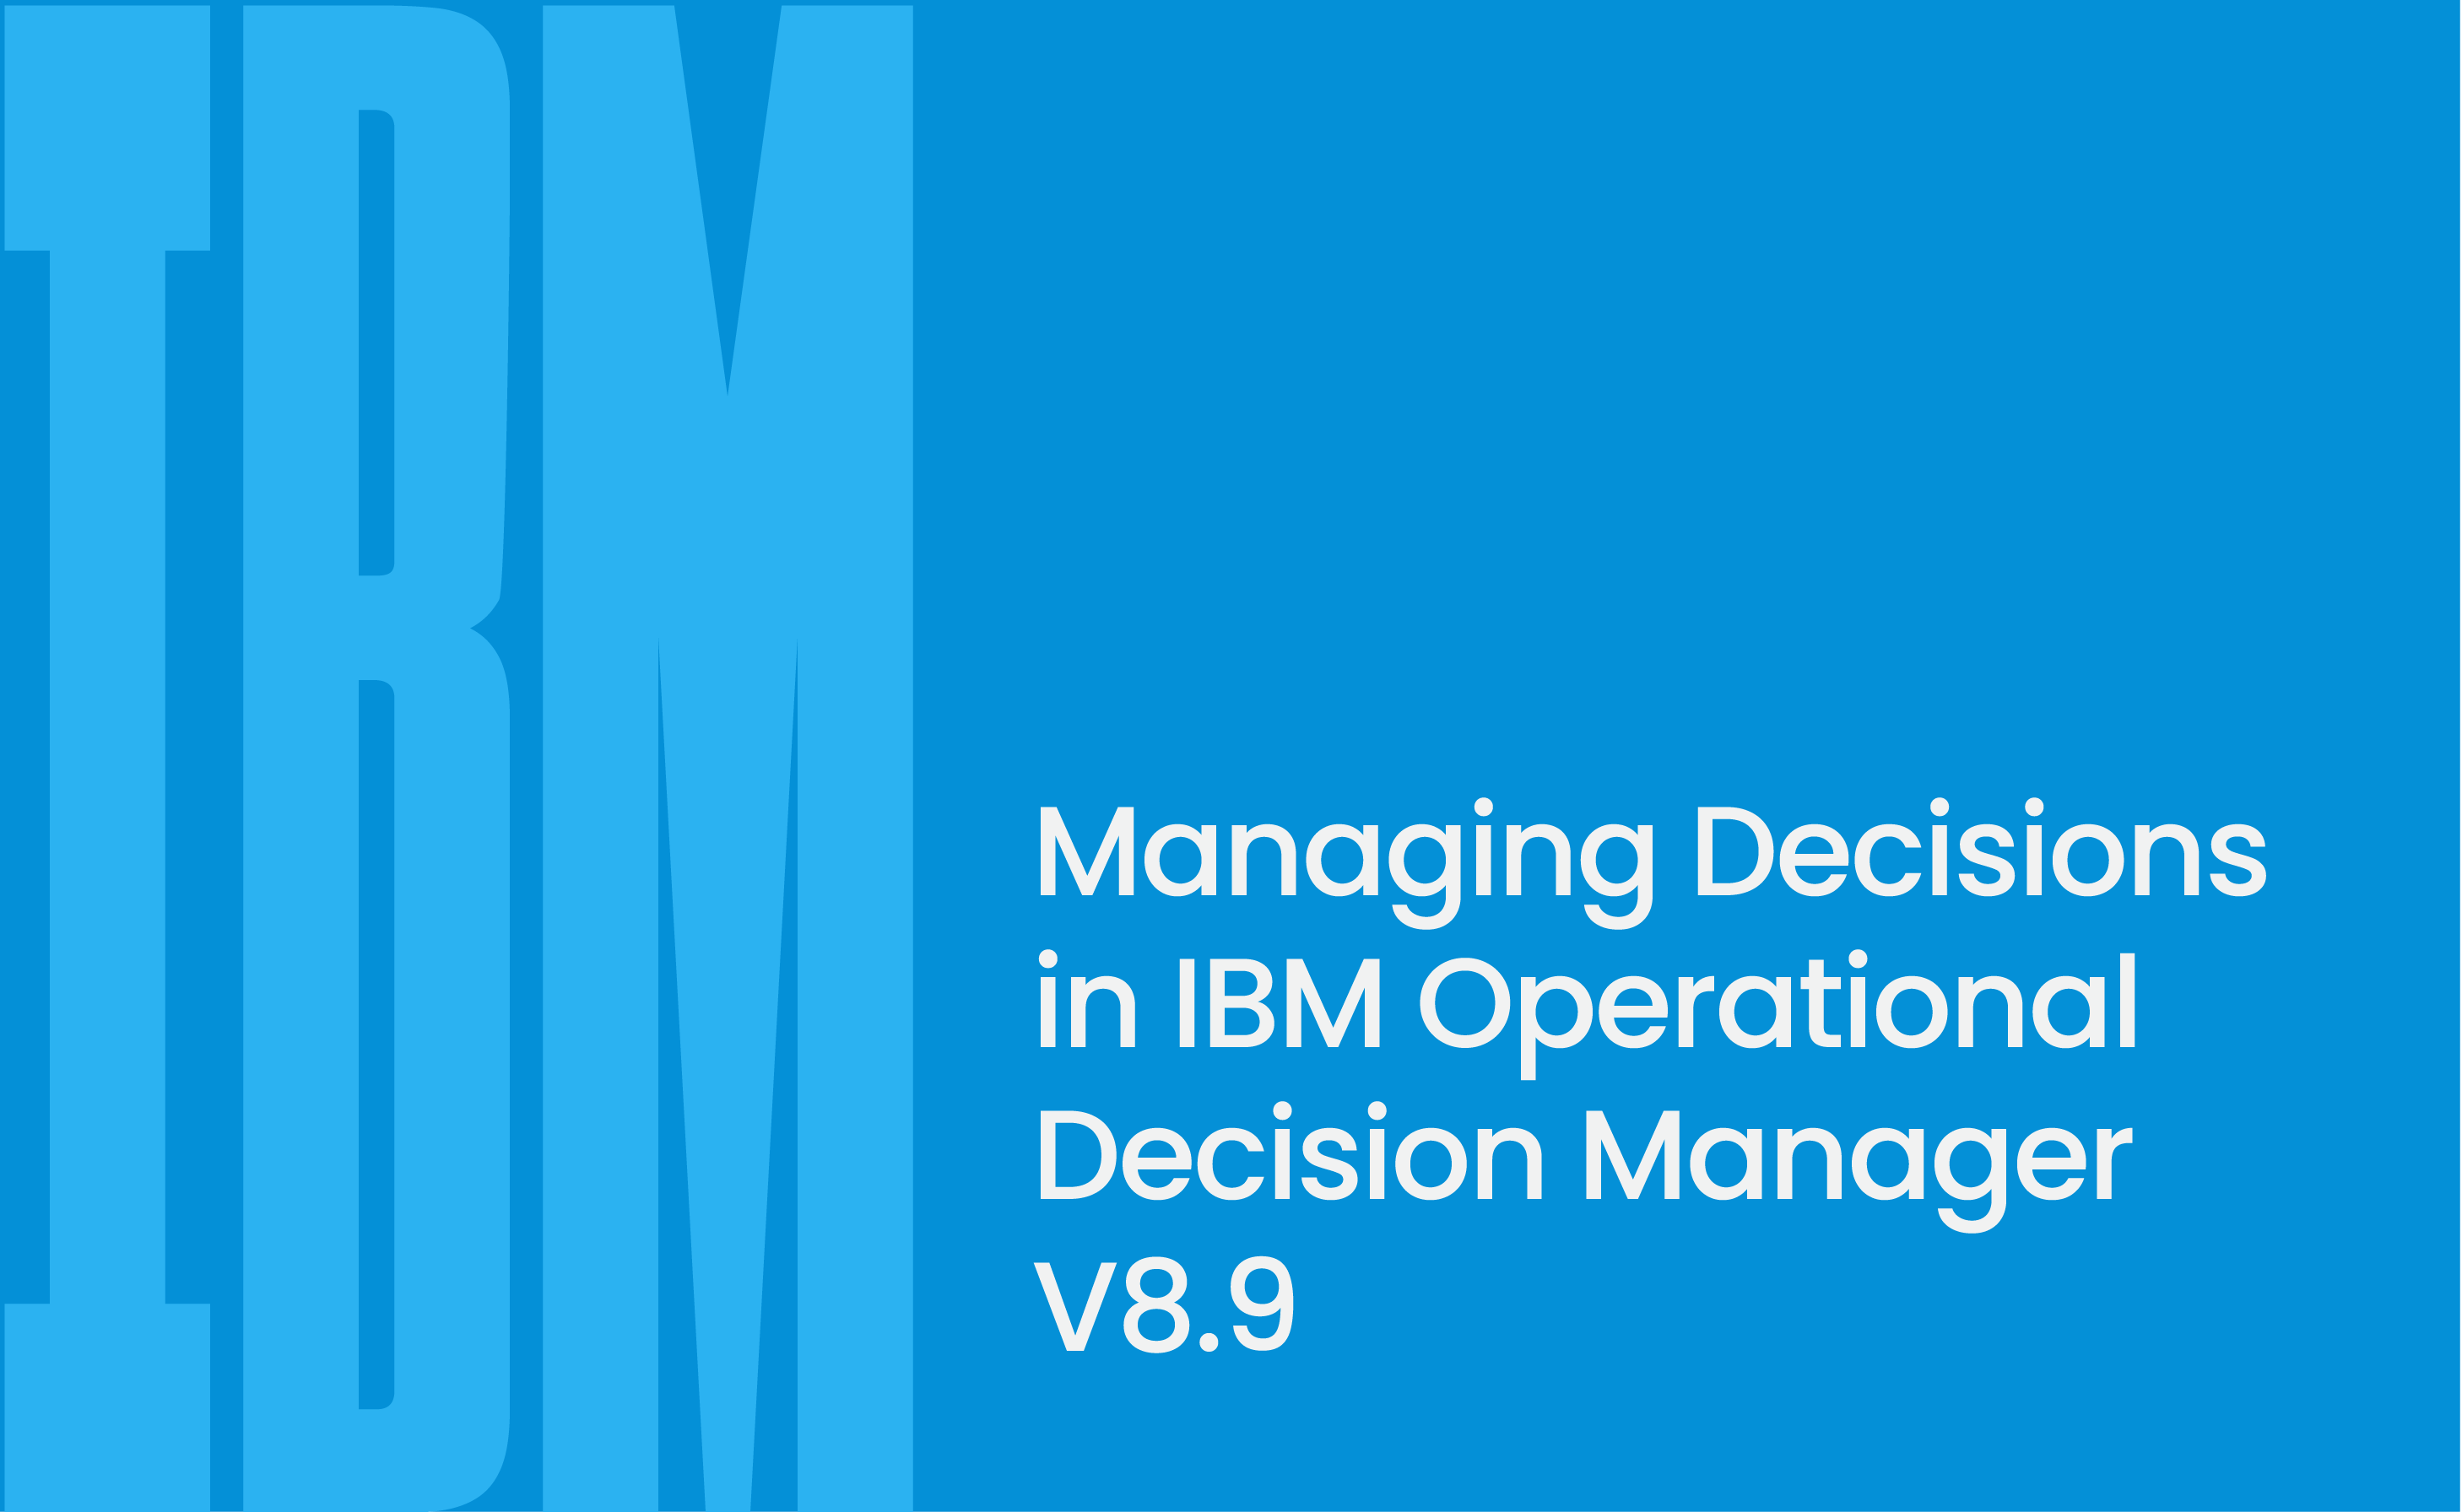 Managing Decisions in IBM Operational Decision Manager V8.9